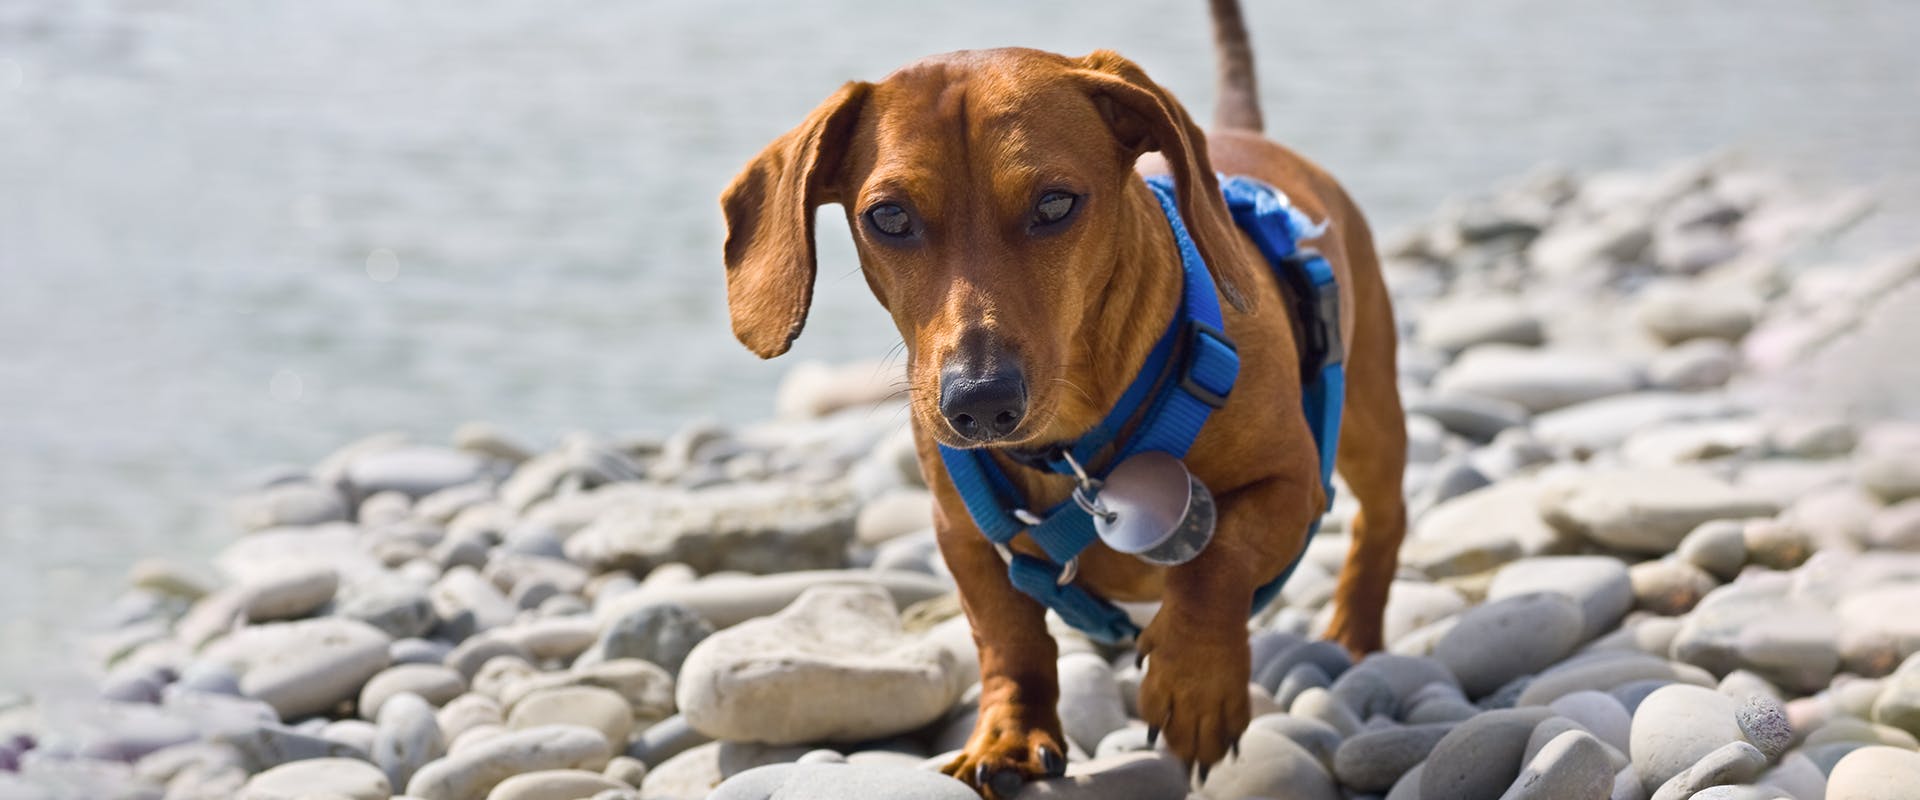 A Dachshund dog walking by the ocean, wearing a yellow and black small dog harness